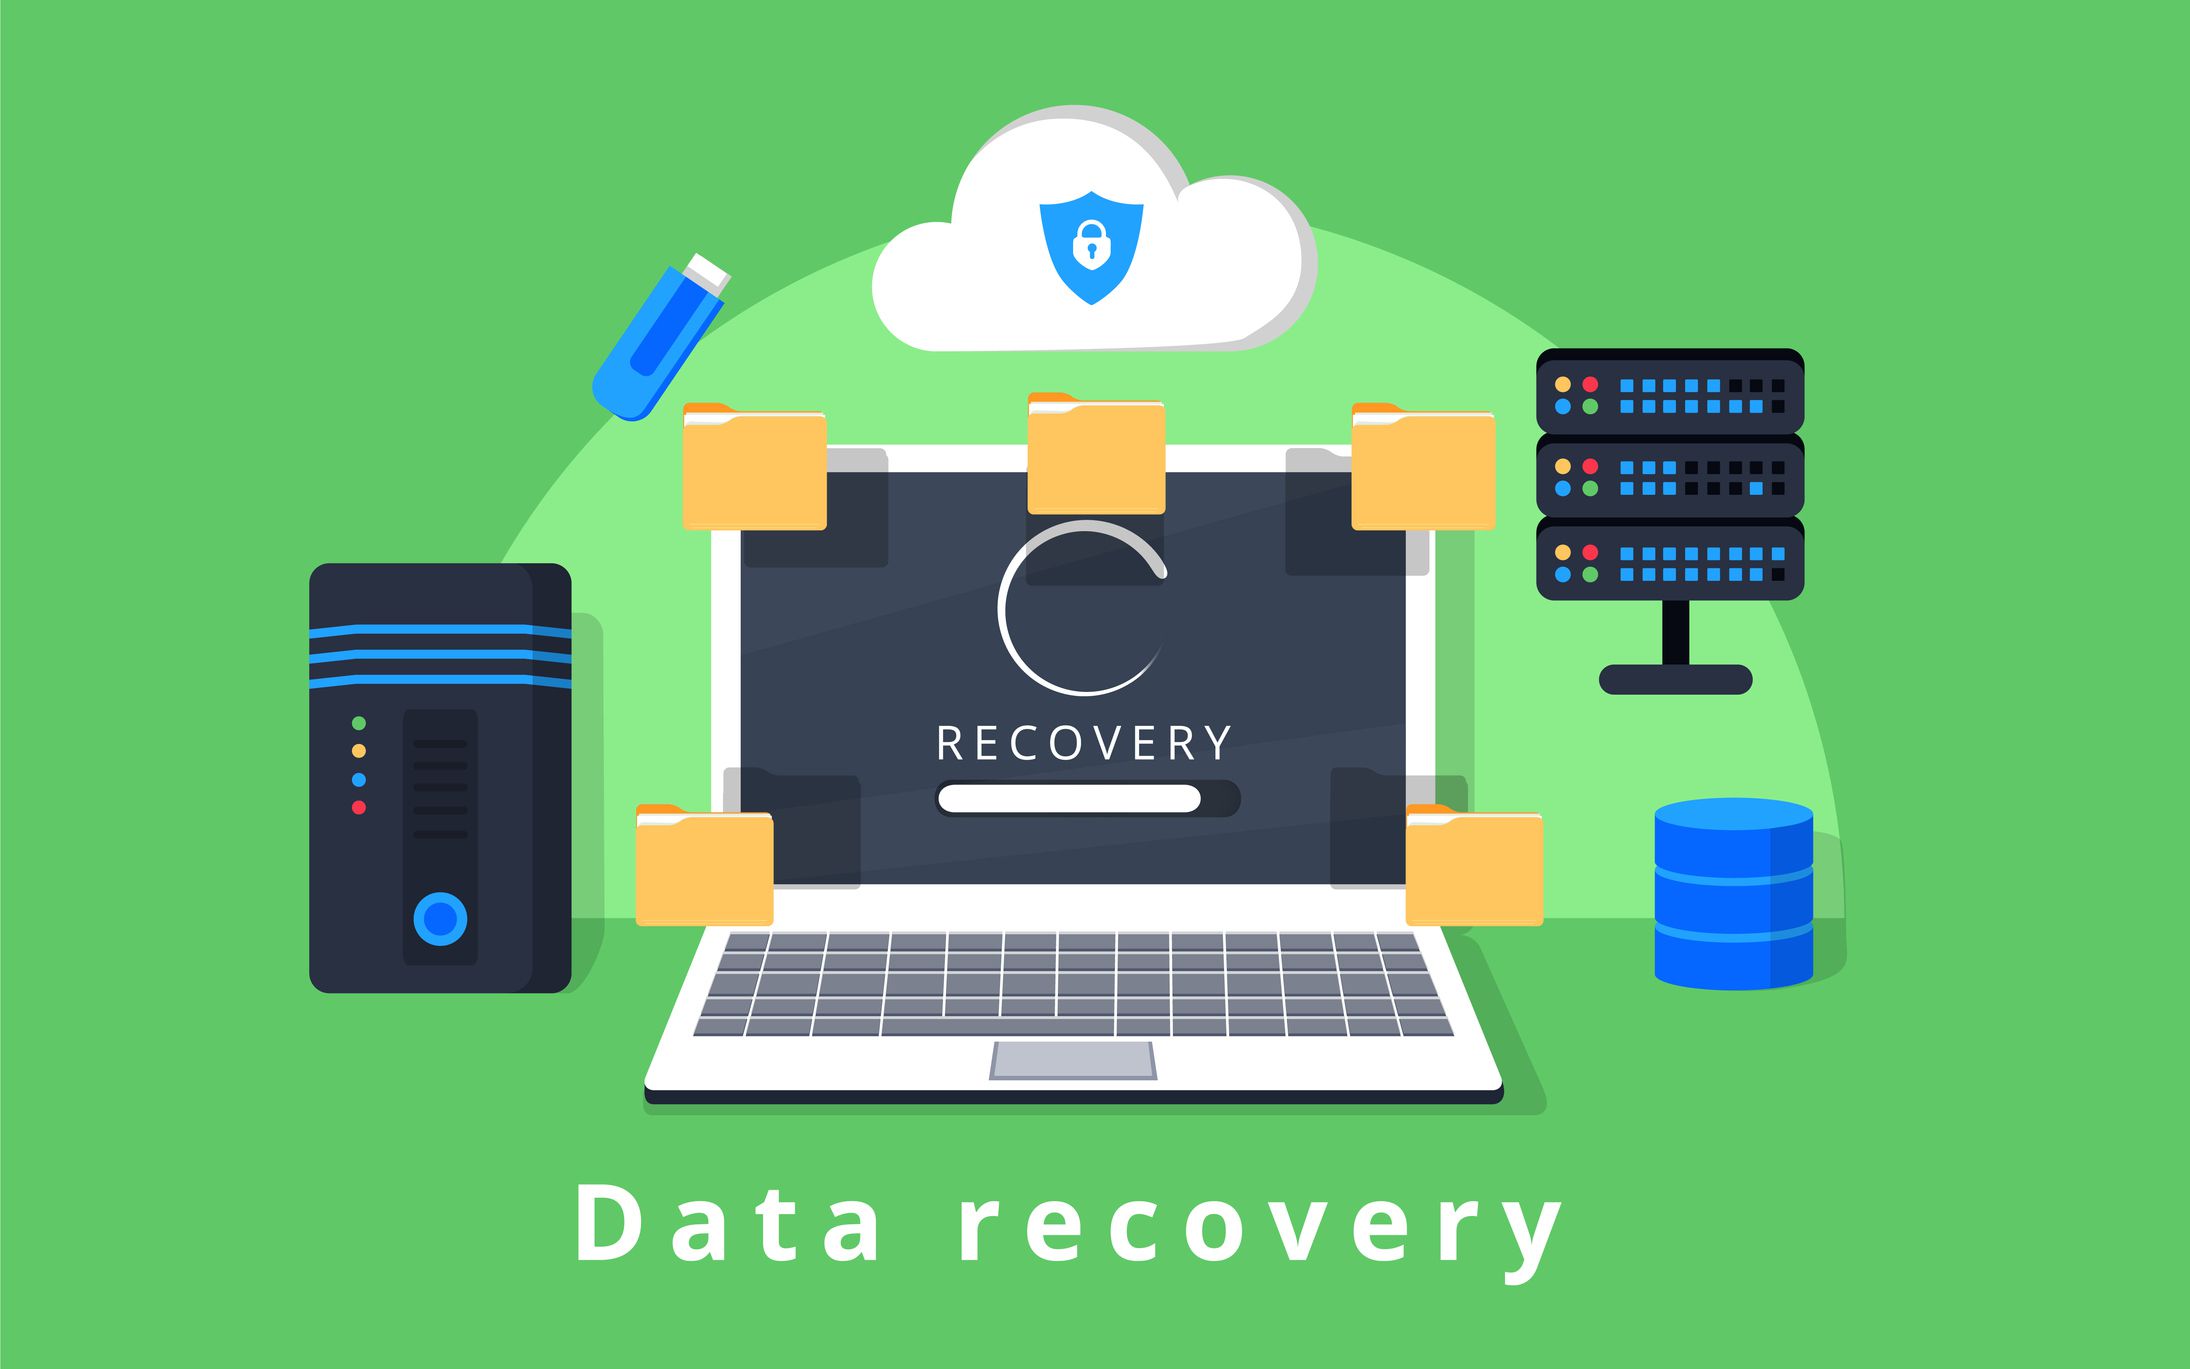 ios data recovery download